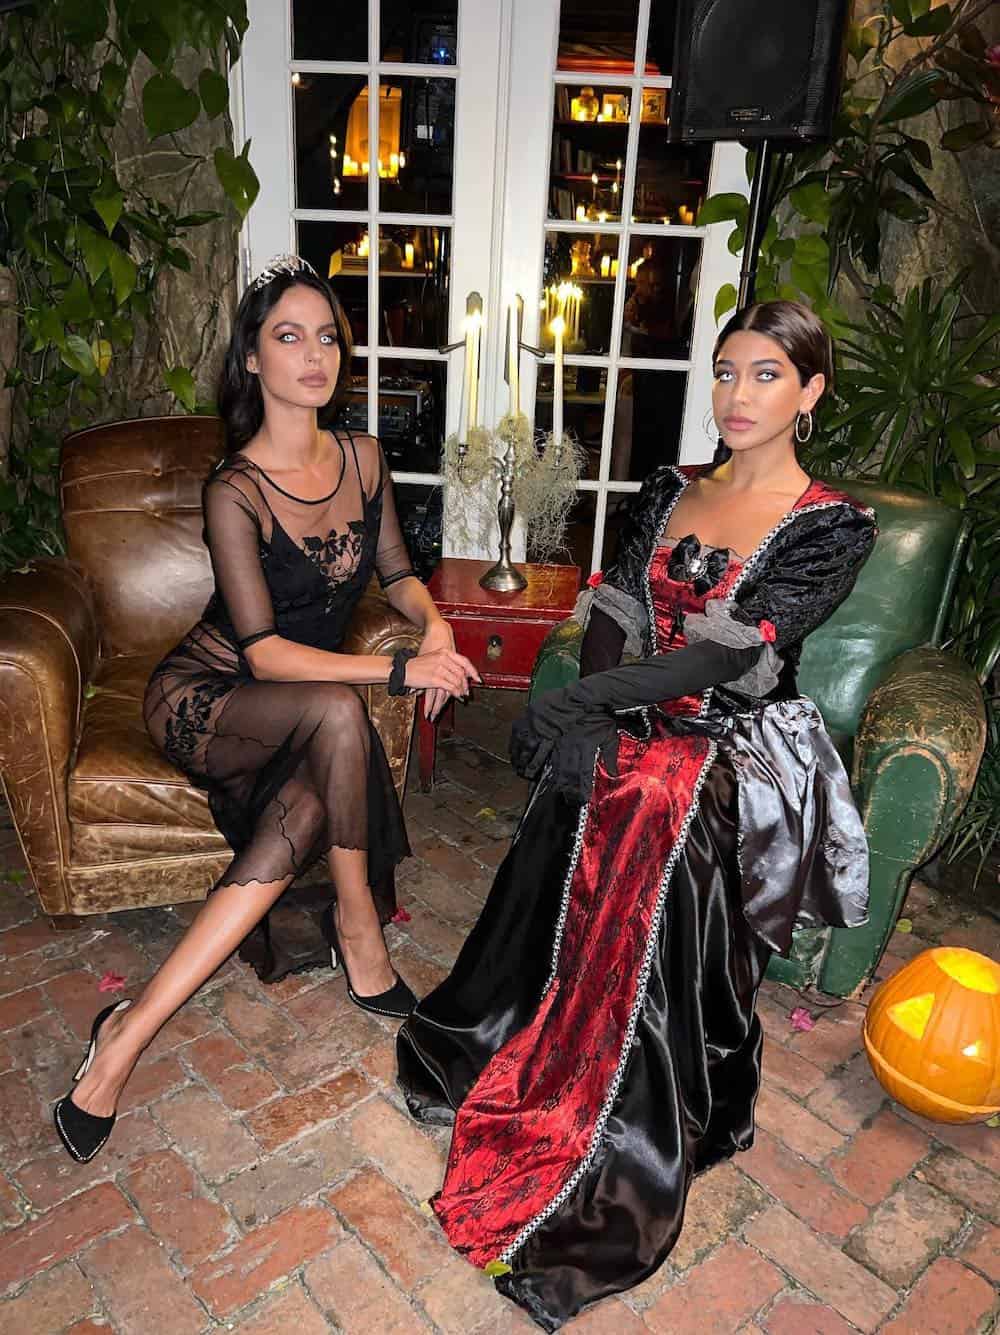 Two women dressed up as vampires on Halloween.